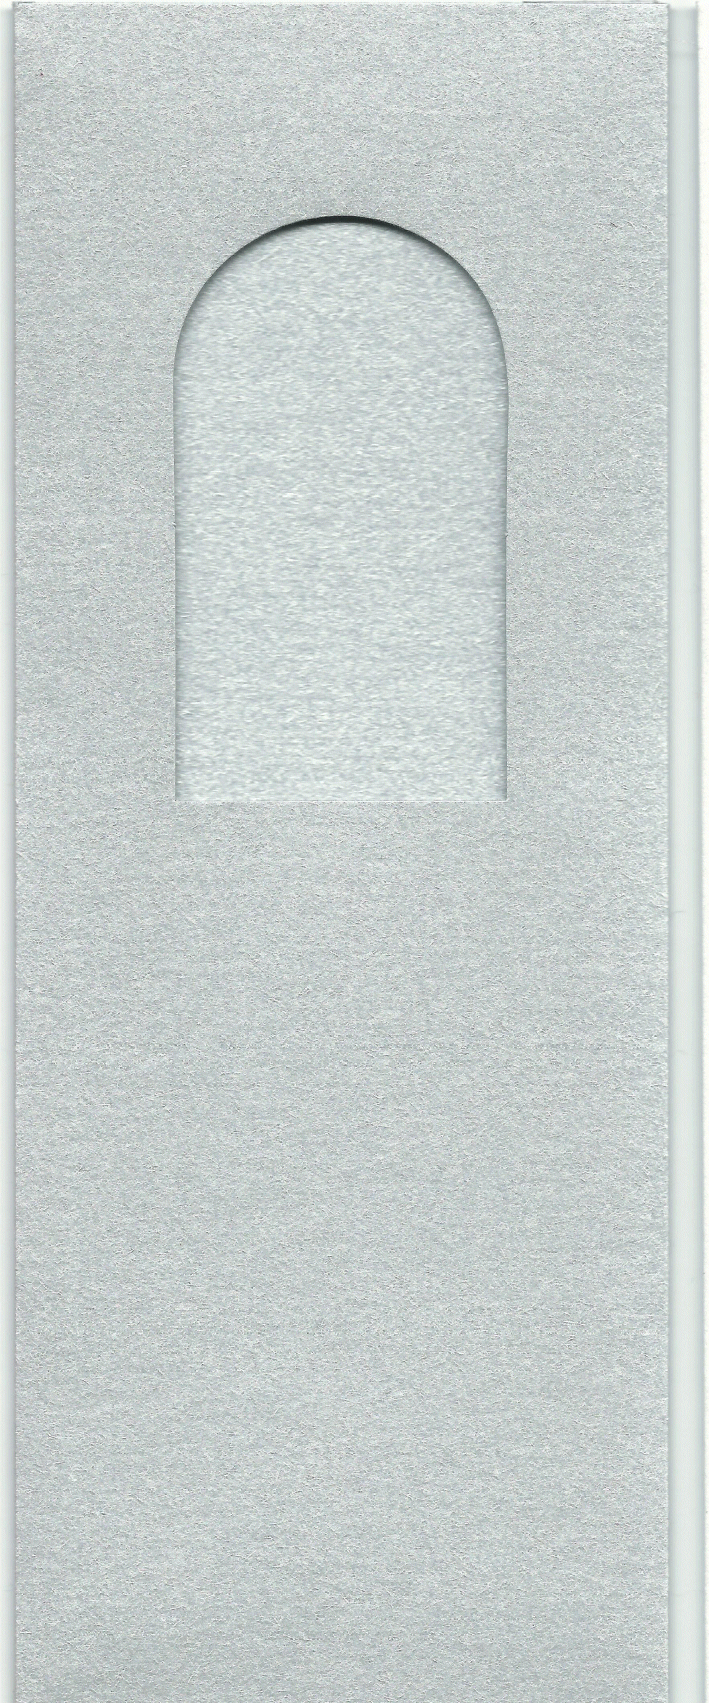 PK282A-82 Silver Double Fold with Small Arched Aperture.  Pack of 5 Cards 